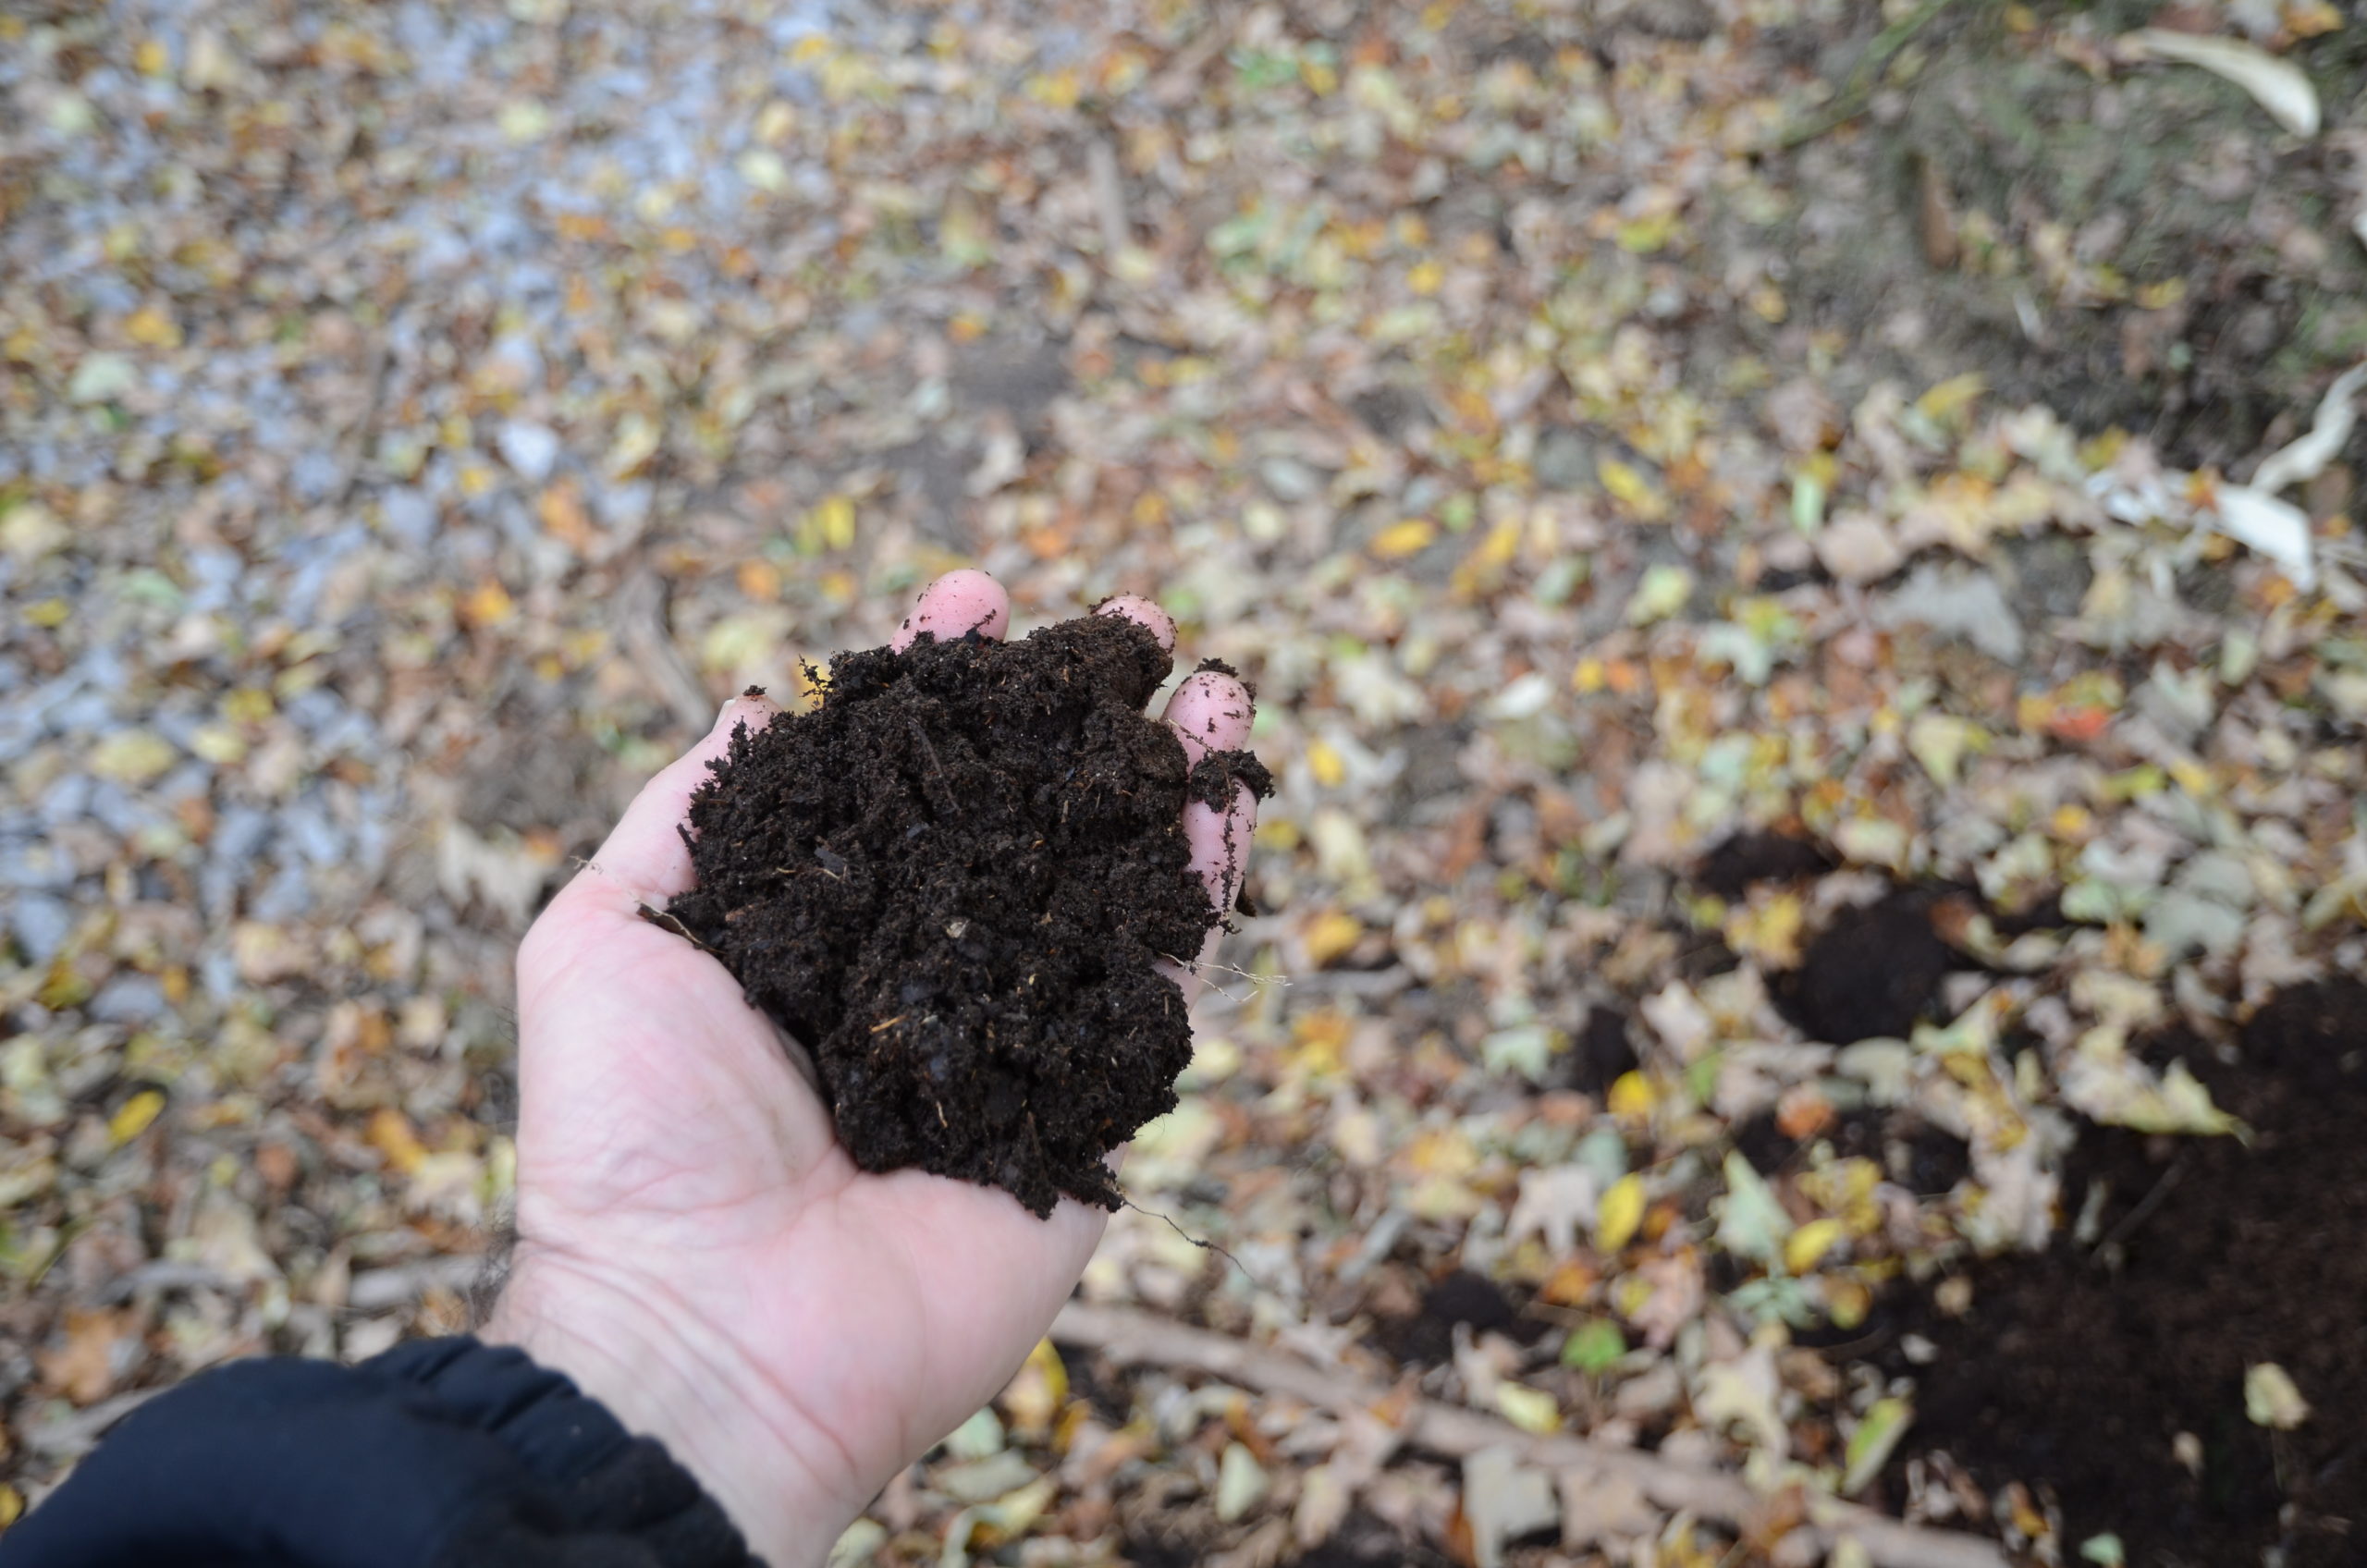 A handful of the Hampton Gardener’s homemade compost after about a year of “cooking.”  The ingredients included shredded leaves, chipped tree limbs and branches, grass clippings and kitchen scraps. This is black gold for your garden.